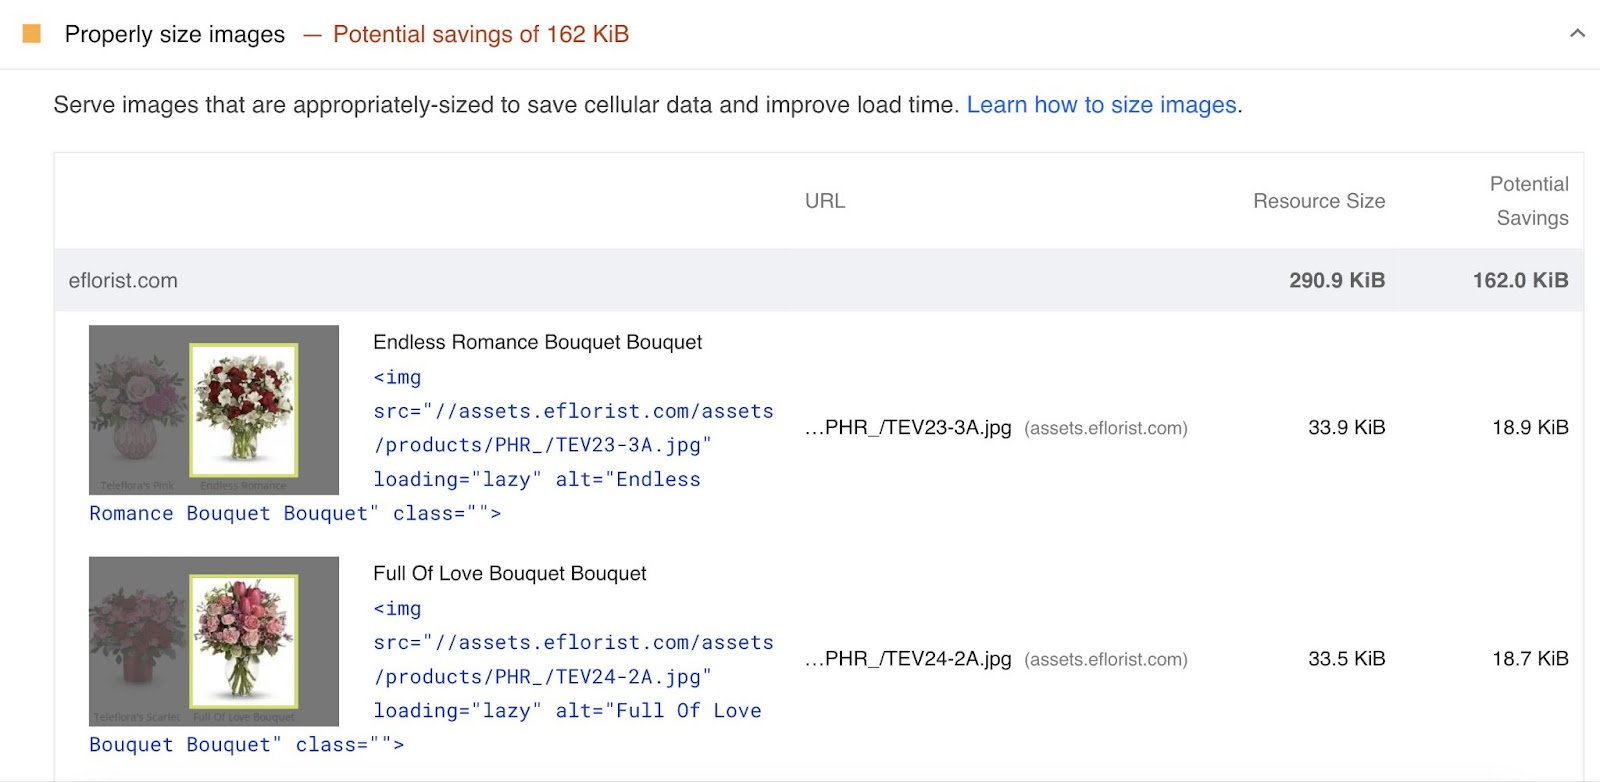 “Properly size images” recommendation in PageSpeed Insights